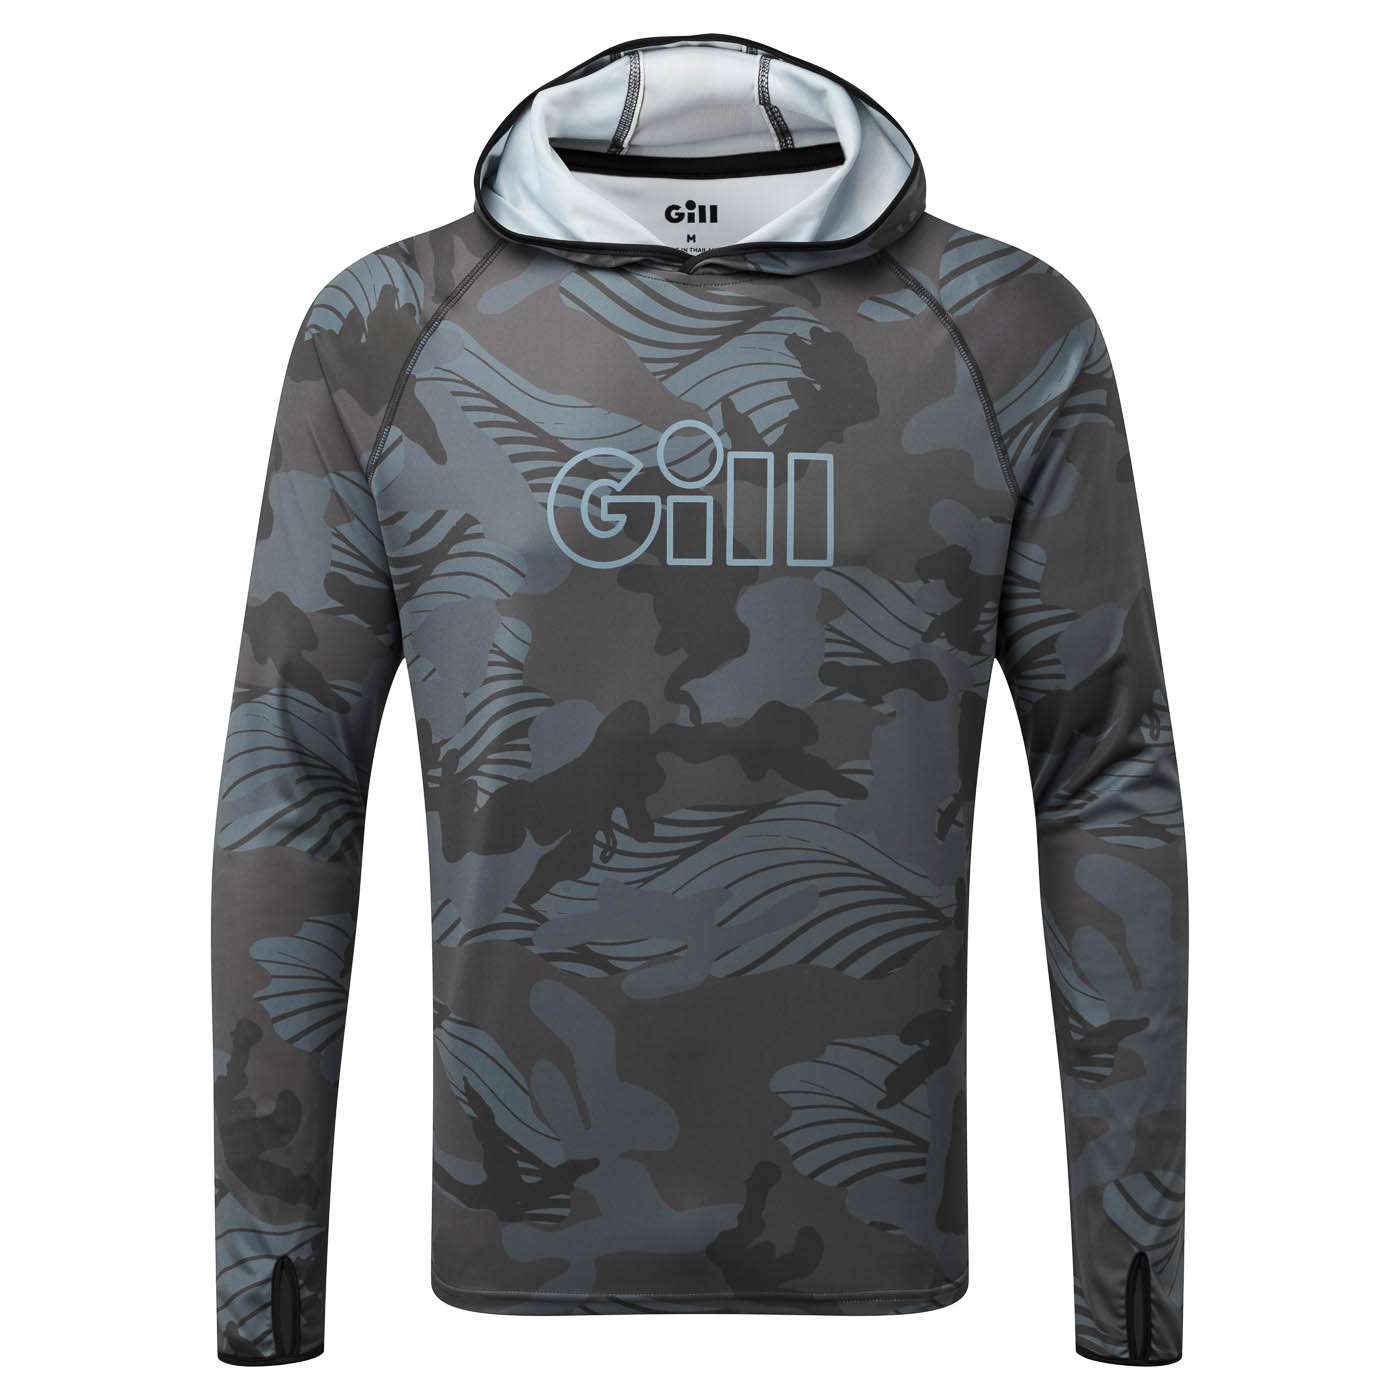 <p><strong>Gill Fishing Men's XPEL Tec Hoodie</strong></p><p>The XPEL Tec Hoody is the ultimate top for hardcore anglers. Gone are the days of sun-exposed skin, soaked shirts from throwing a net, and permanent blood stains. Guaranteed to repel water, oil, blood and other muck and naturally control odors, thanks to Gill Fishingâs exclusive XPEL fabric technology. Fabric is lightweight, breathable, and moisture wicking and provides 50+ UV protection. New regular fit. Available in 6 new colors: Shadow Camo, Pool Camo, Ice, Twilight, Glacier, and White. $49.95. <a href=